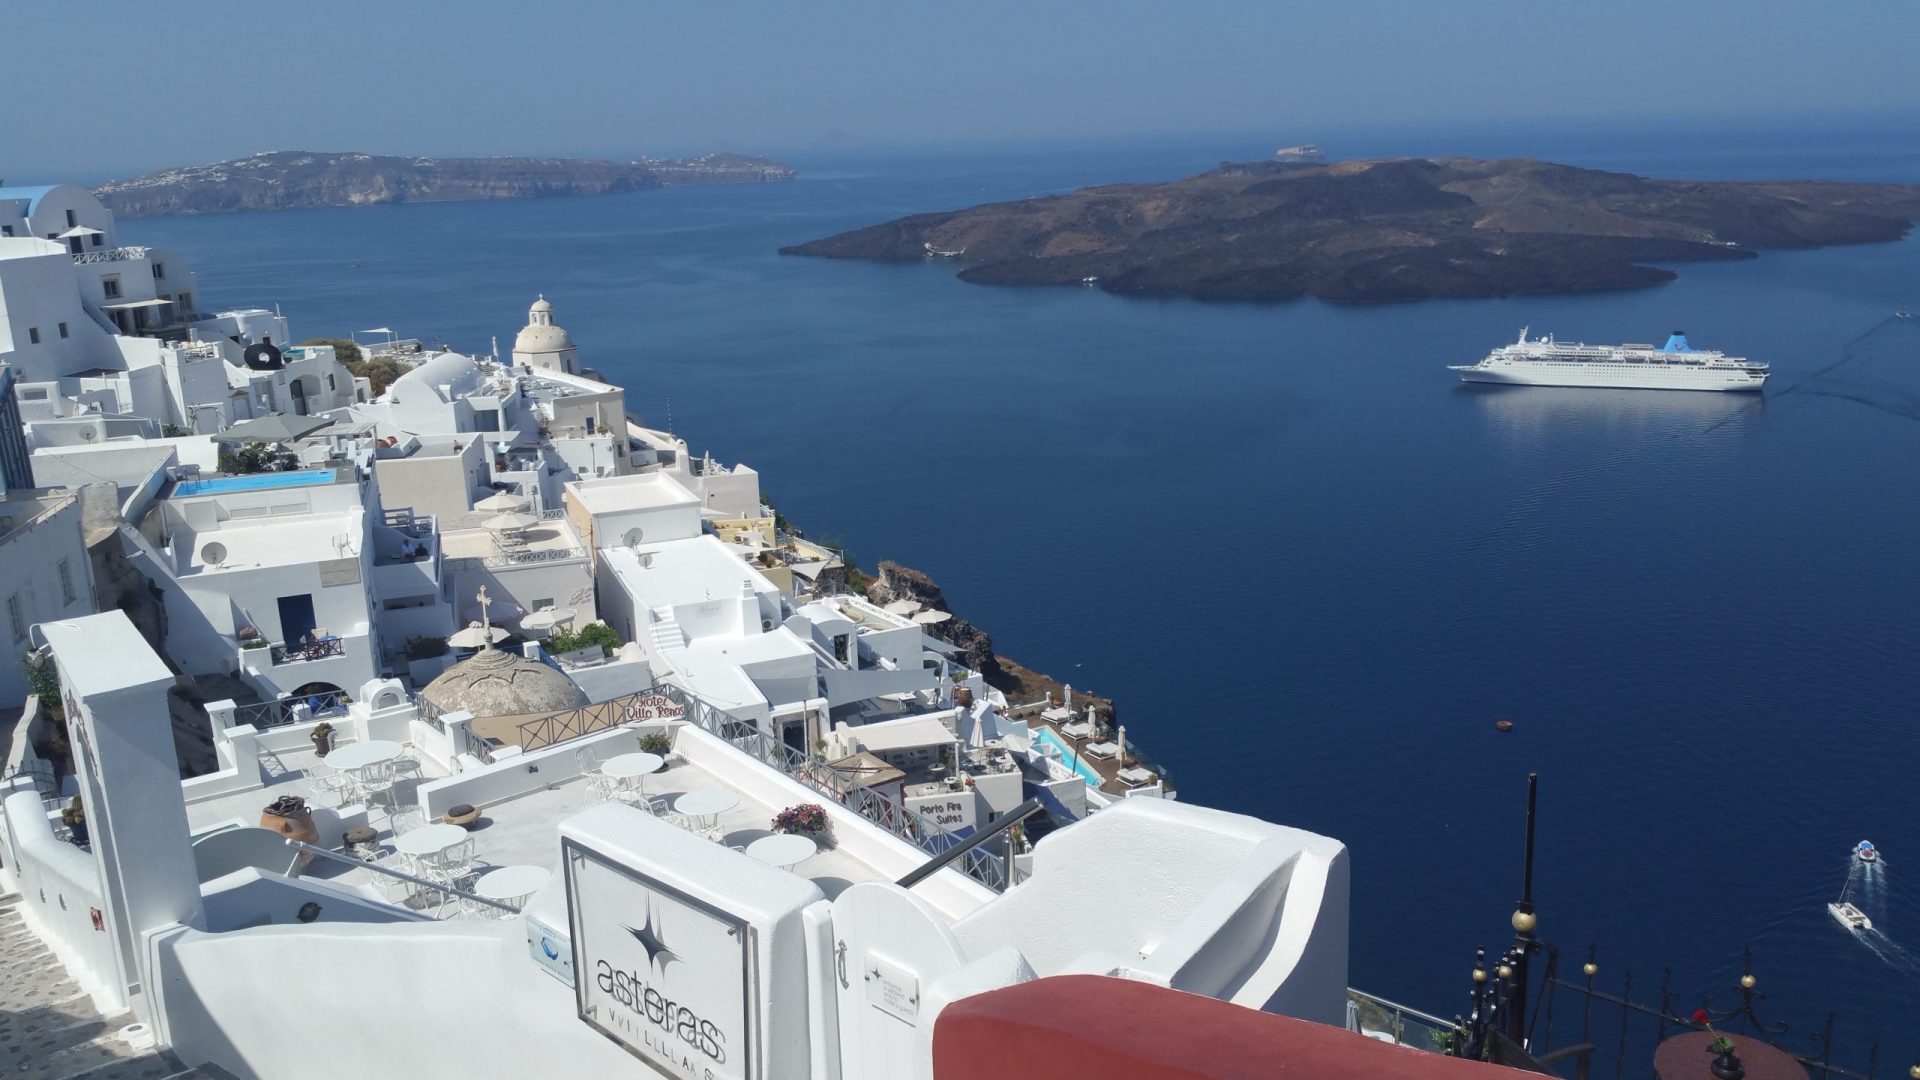 Santorini Cruise Port Information - all you need to know! - Paul and